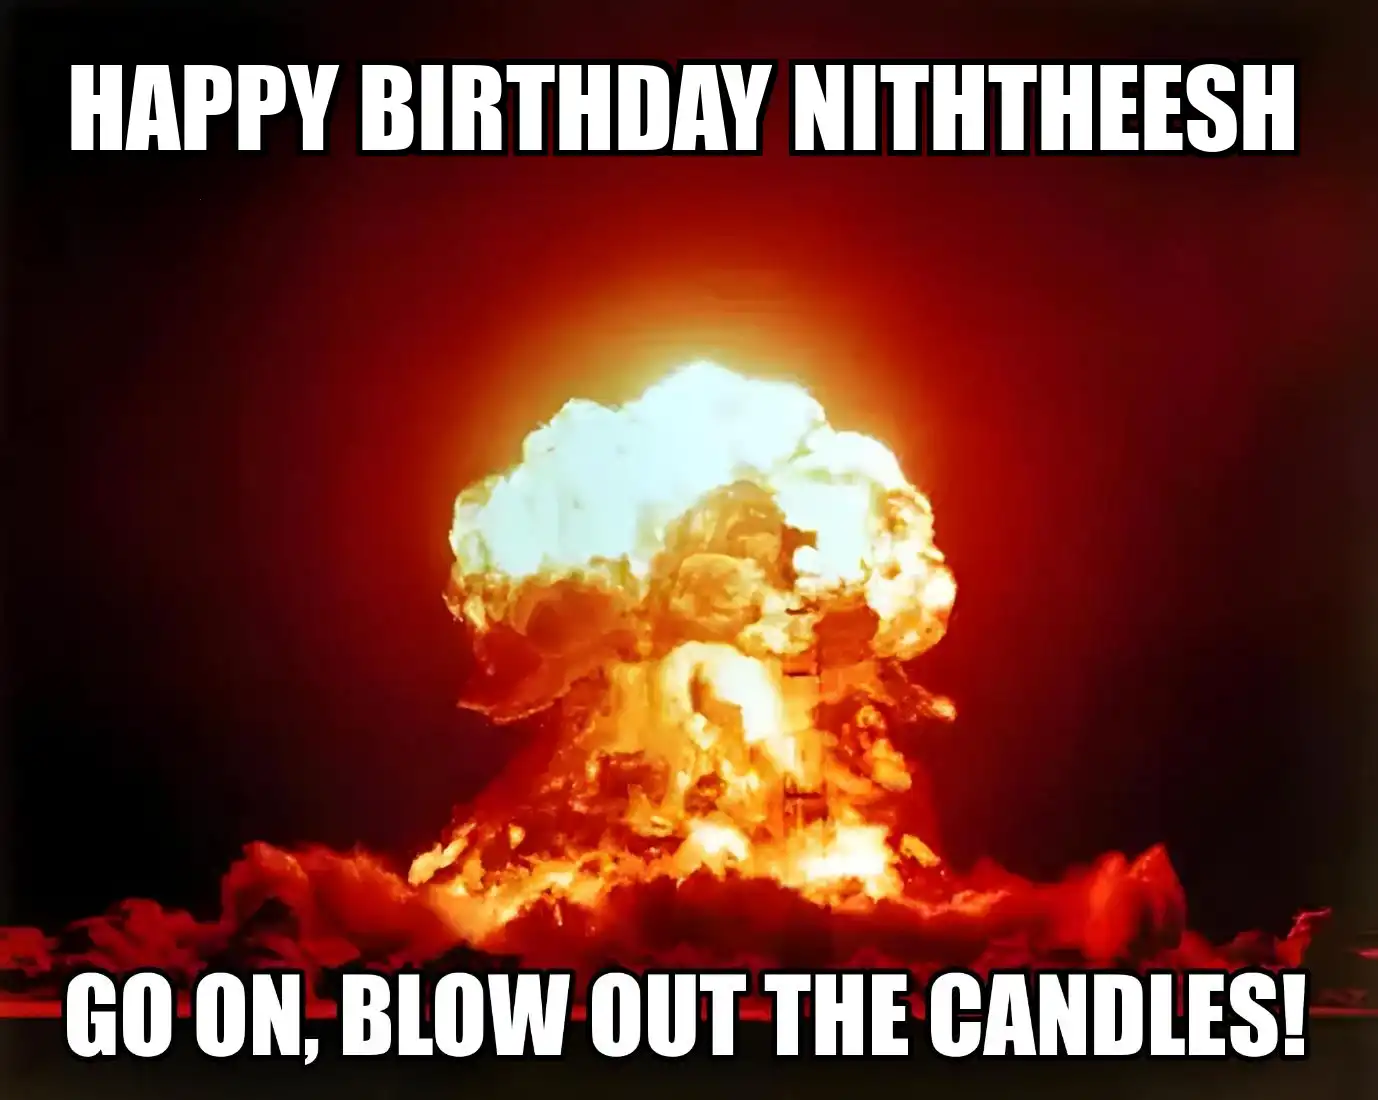 Happy Birthday Niththeesh Go On Blow Out The Candles Meme